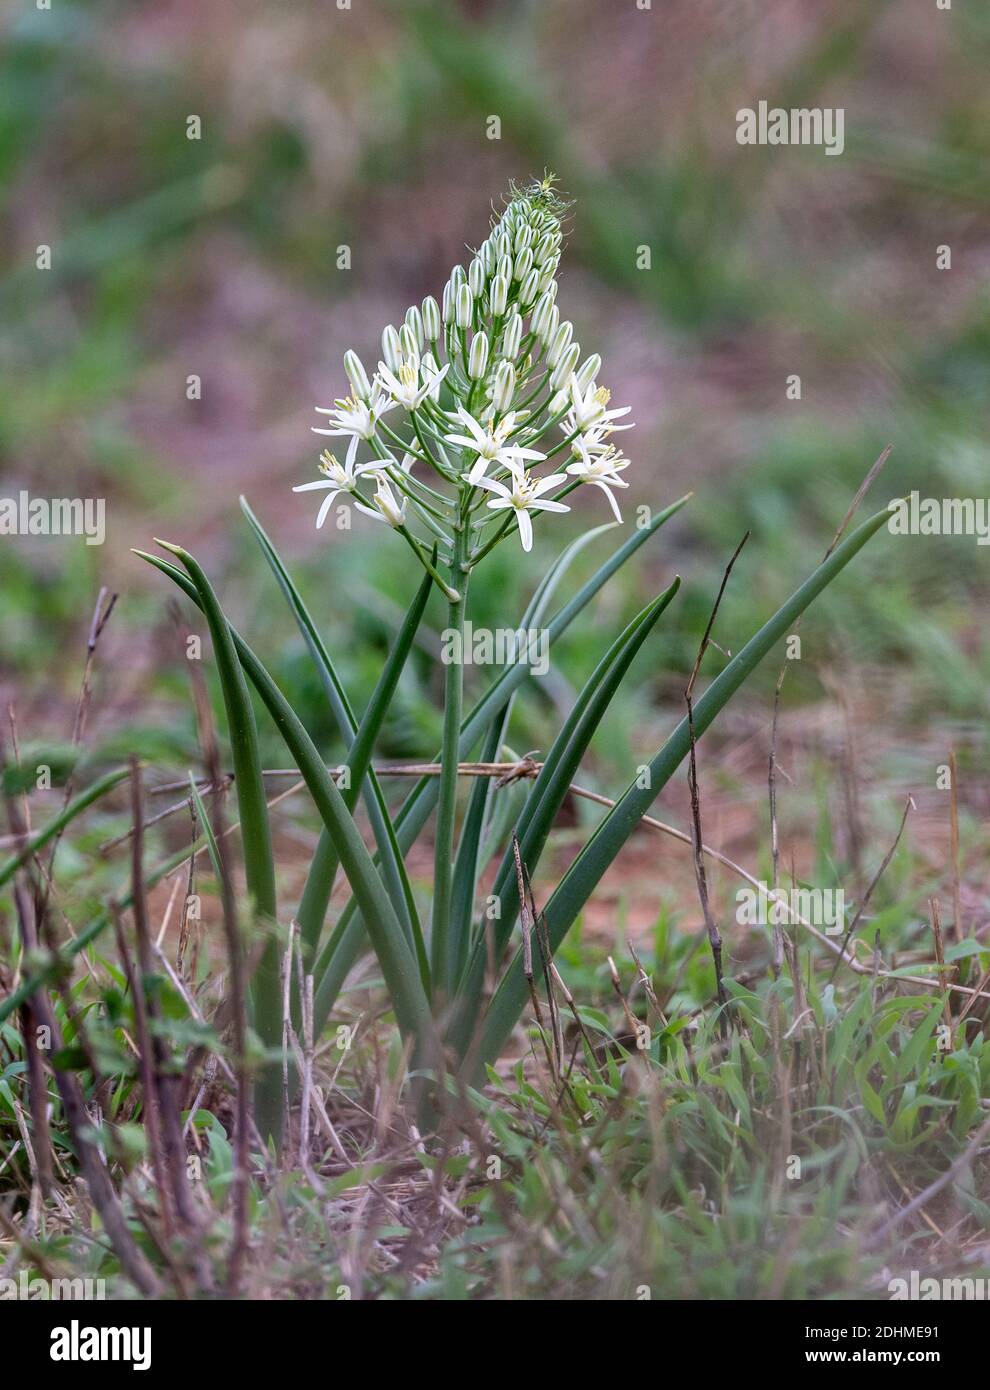 Albuca seineri (syn. Ornithogalum seineri) from Kruger NP, South Africa. Stock Photo